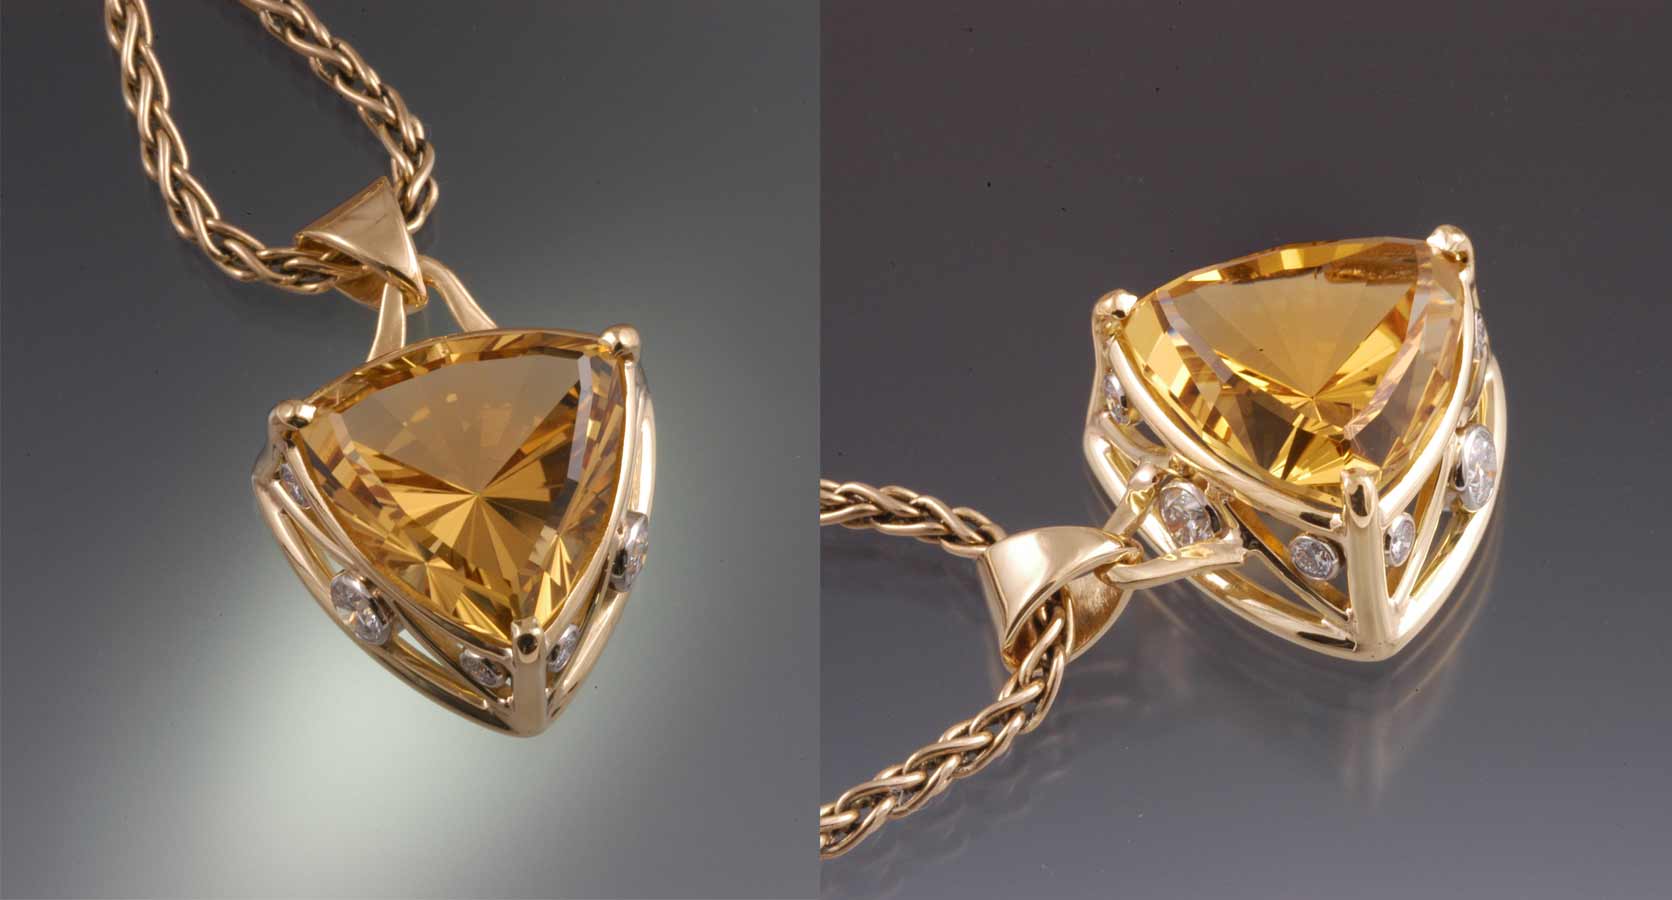 Diamond and 14kt gold pendant with Golden Beryl by Gary Dawson